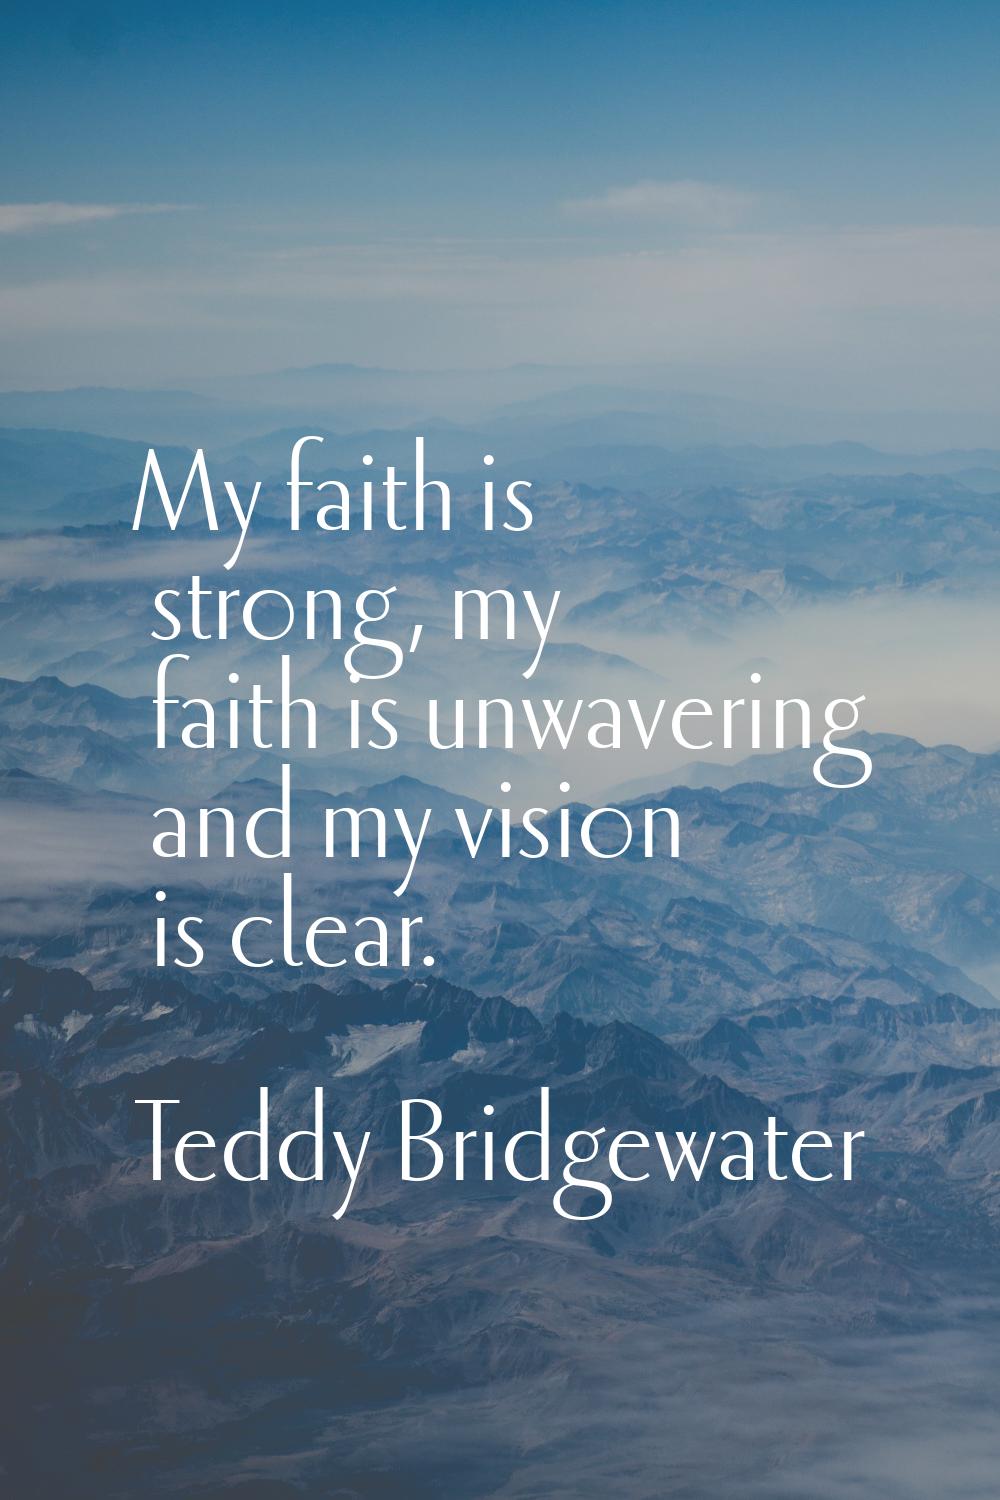 My faith is strong, my faith is unwavering and my vision is clear.